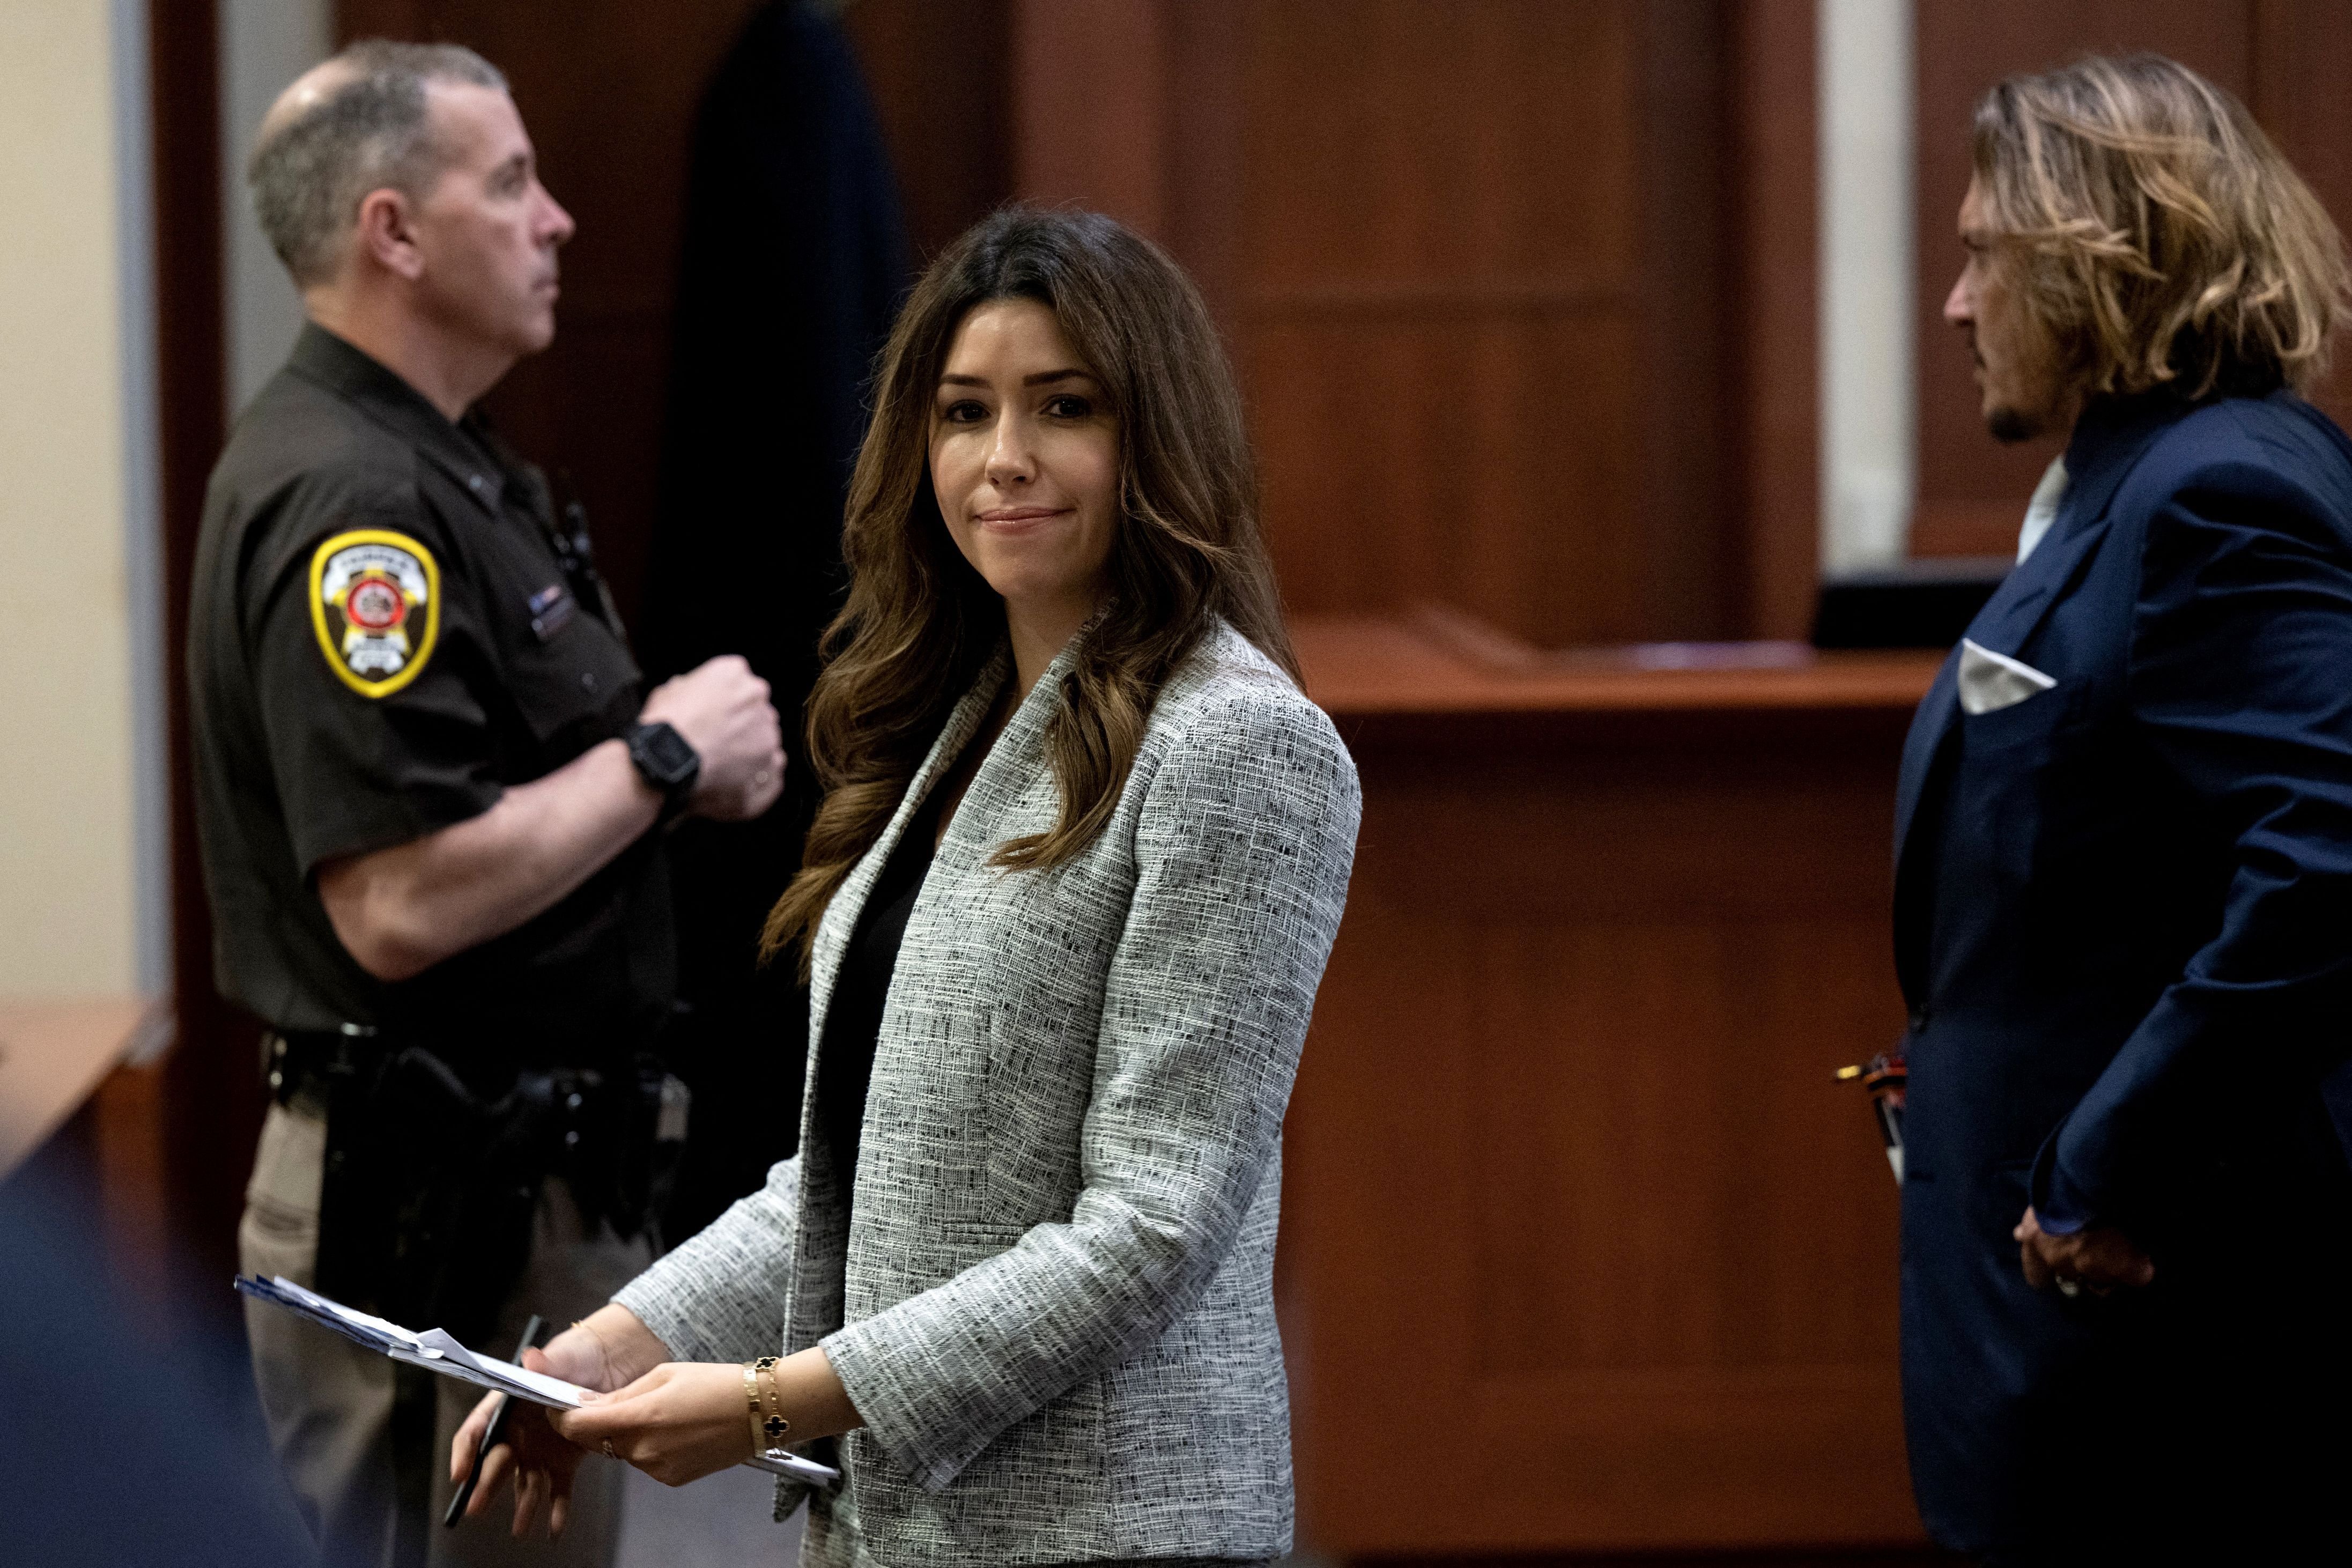 Camille Vasquez during the Depp vs Heard defamation trial at the Fairfax County Circuit Court in Fairfax, Virginia, on April 12, 2022. | Source: Getty Images